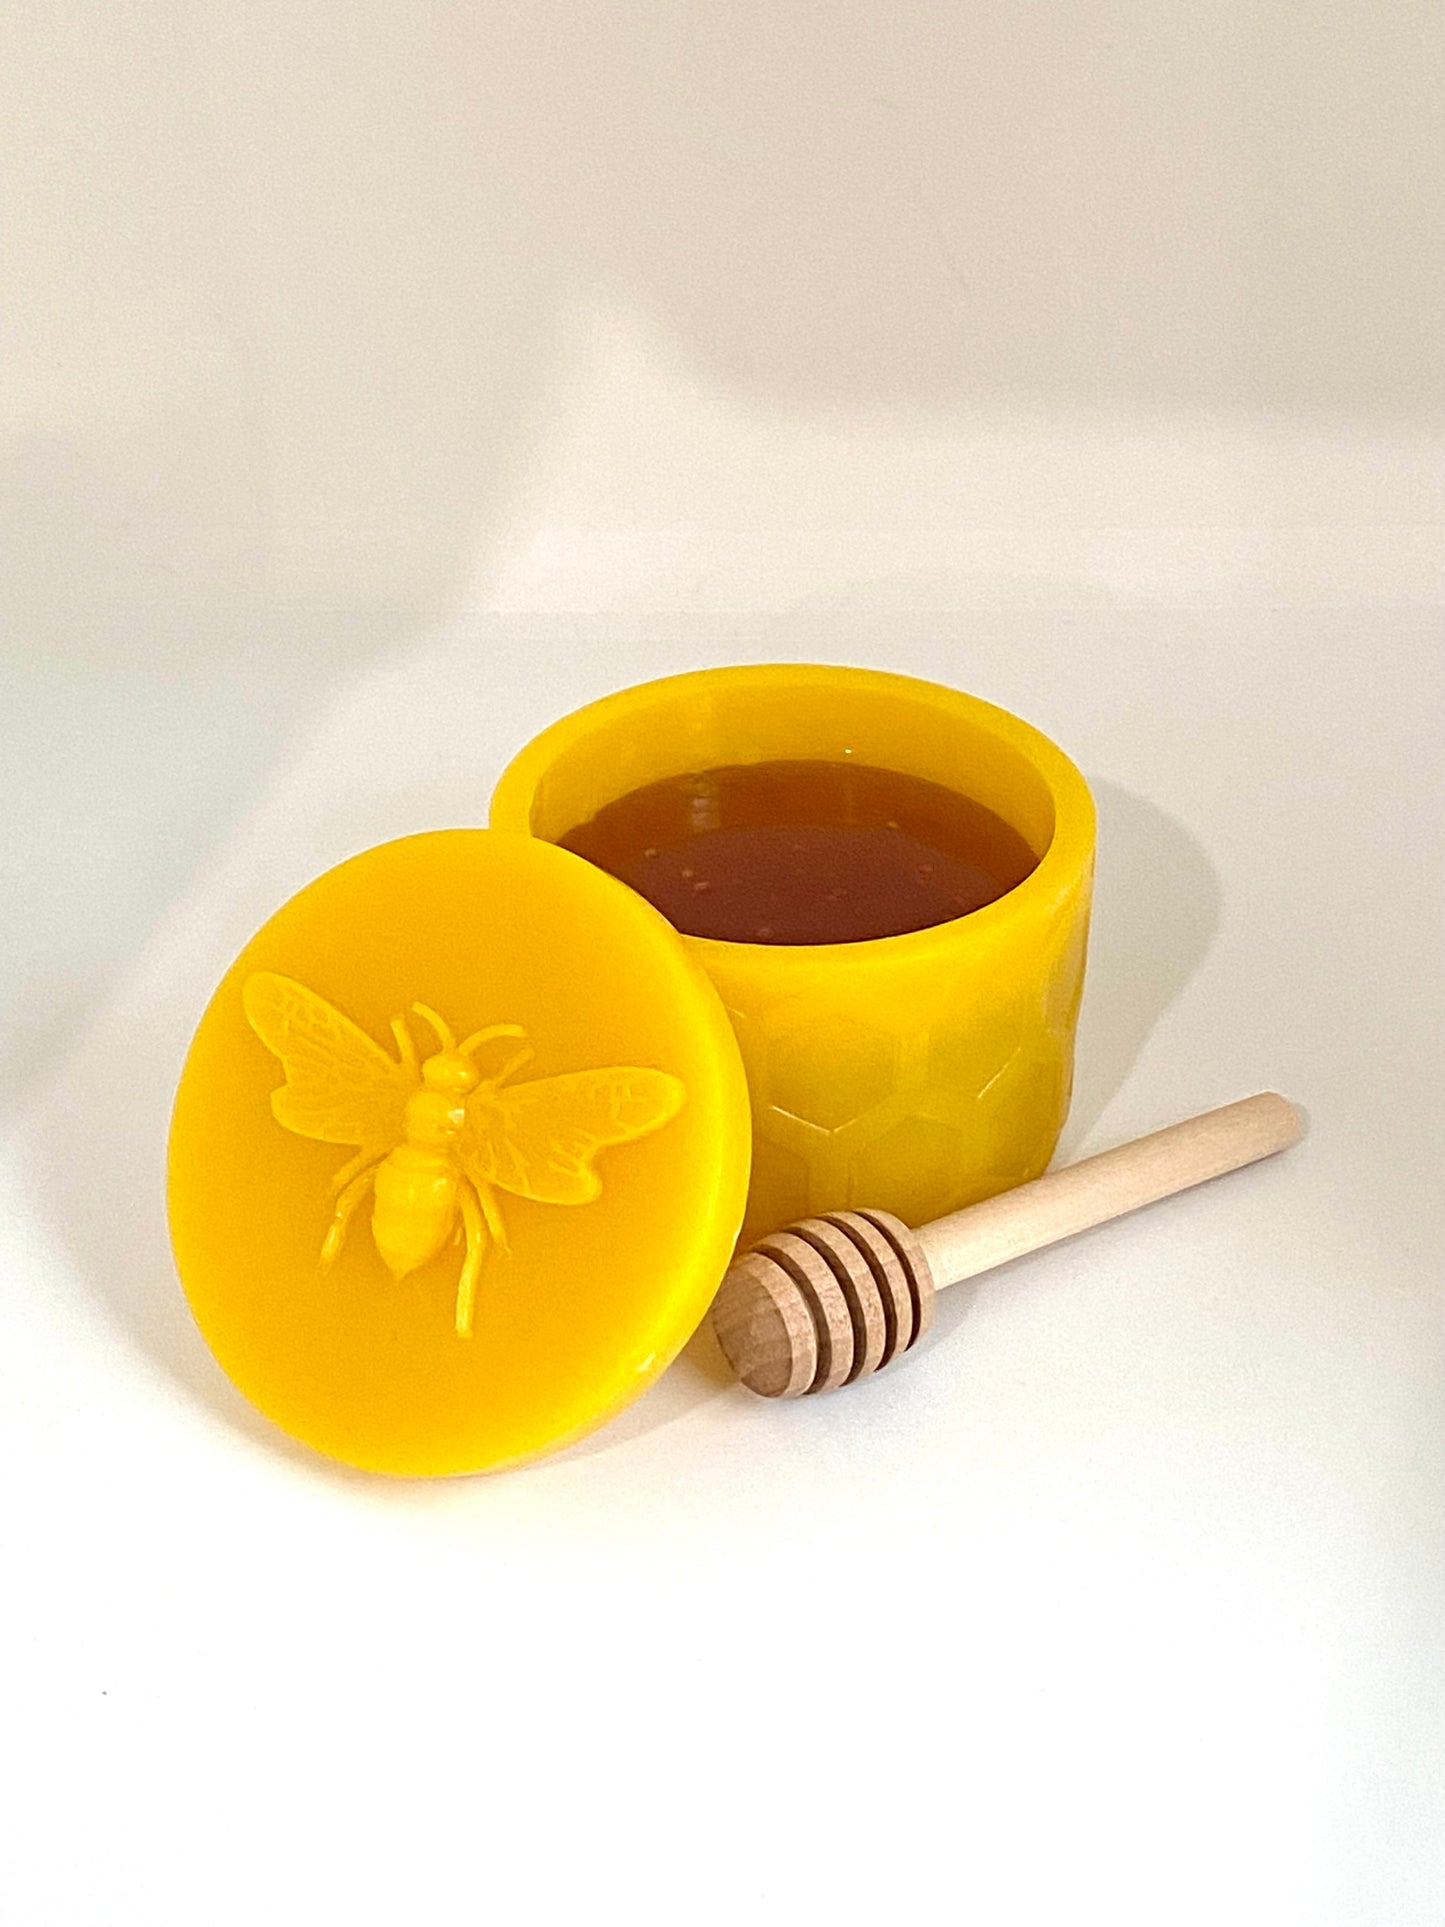 3" Beeswax Container